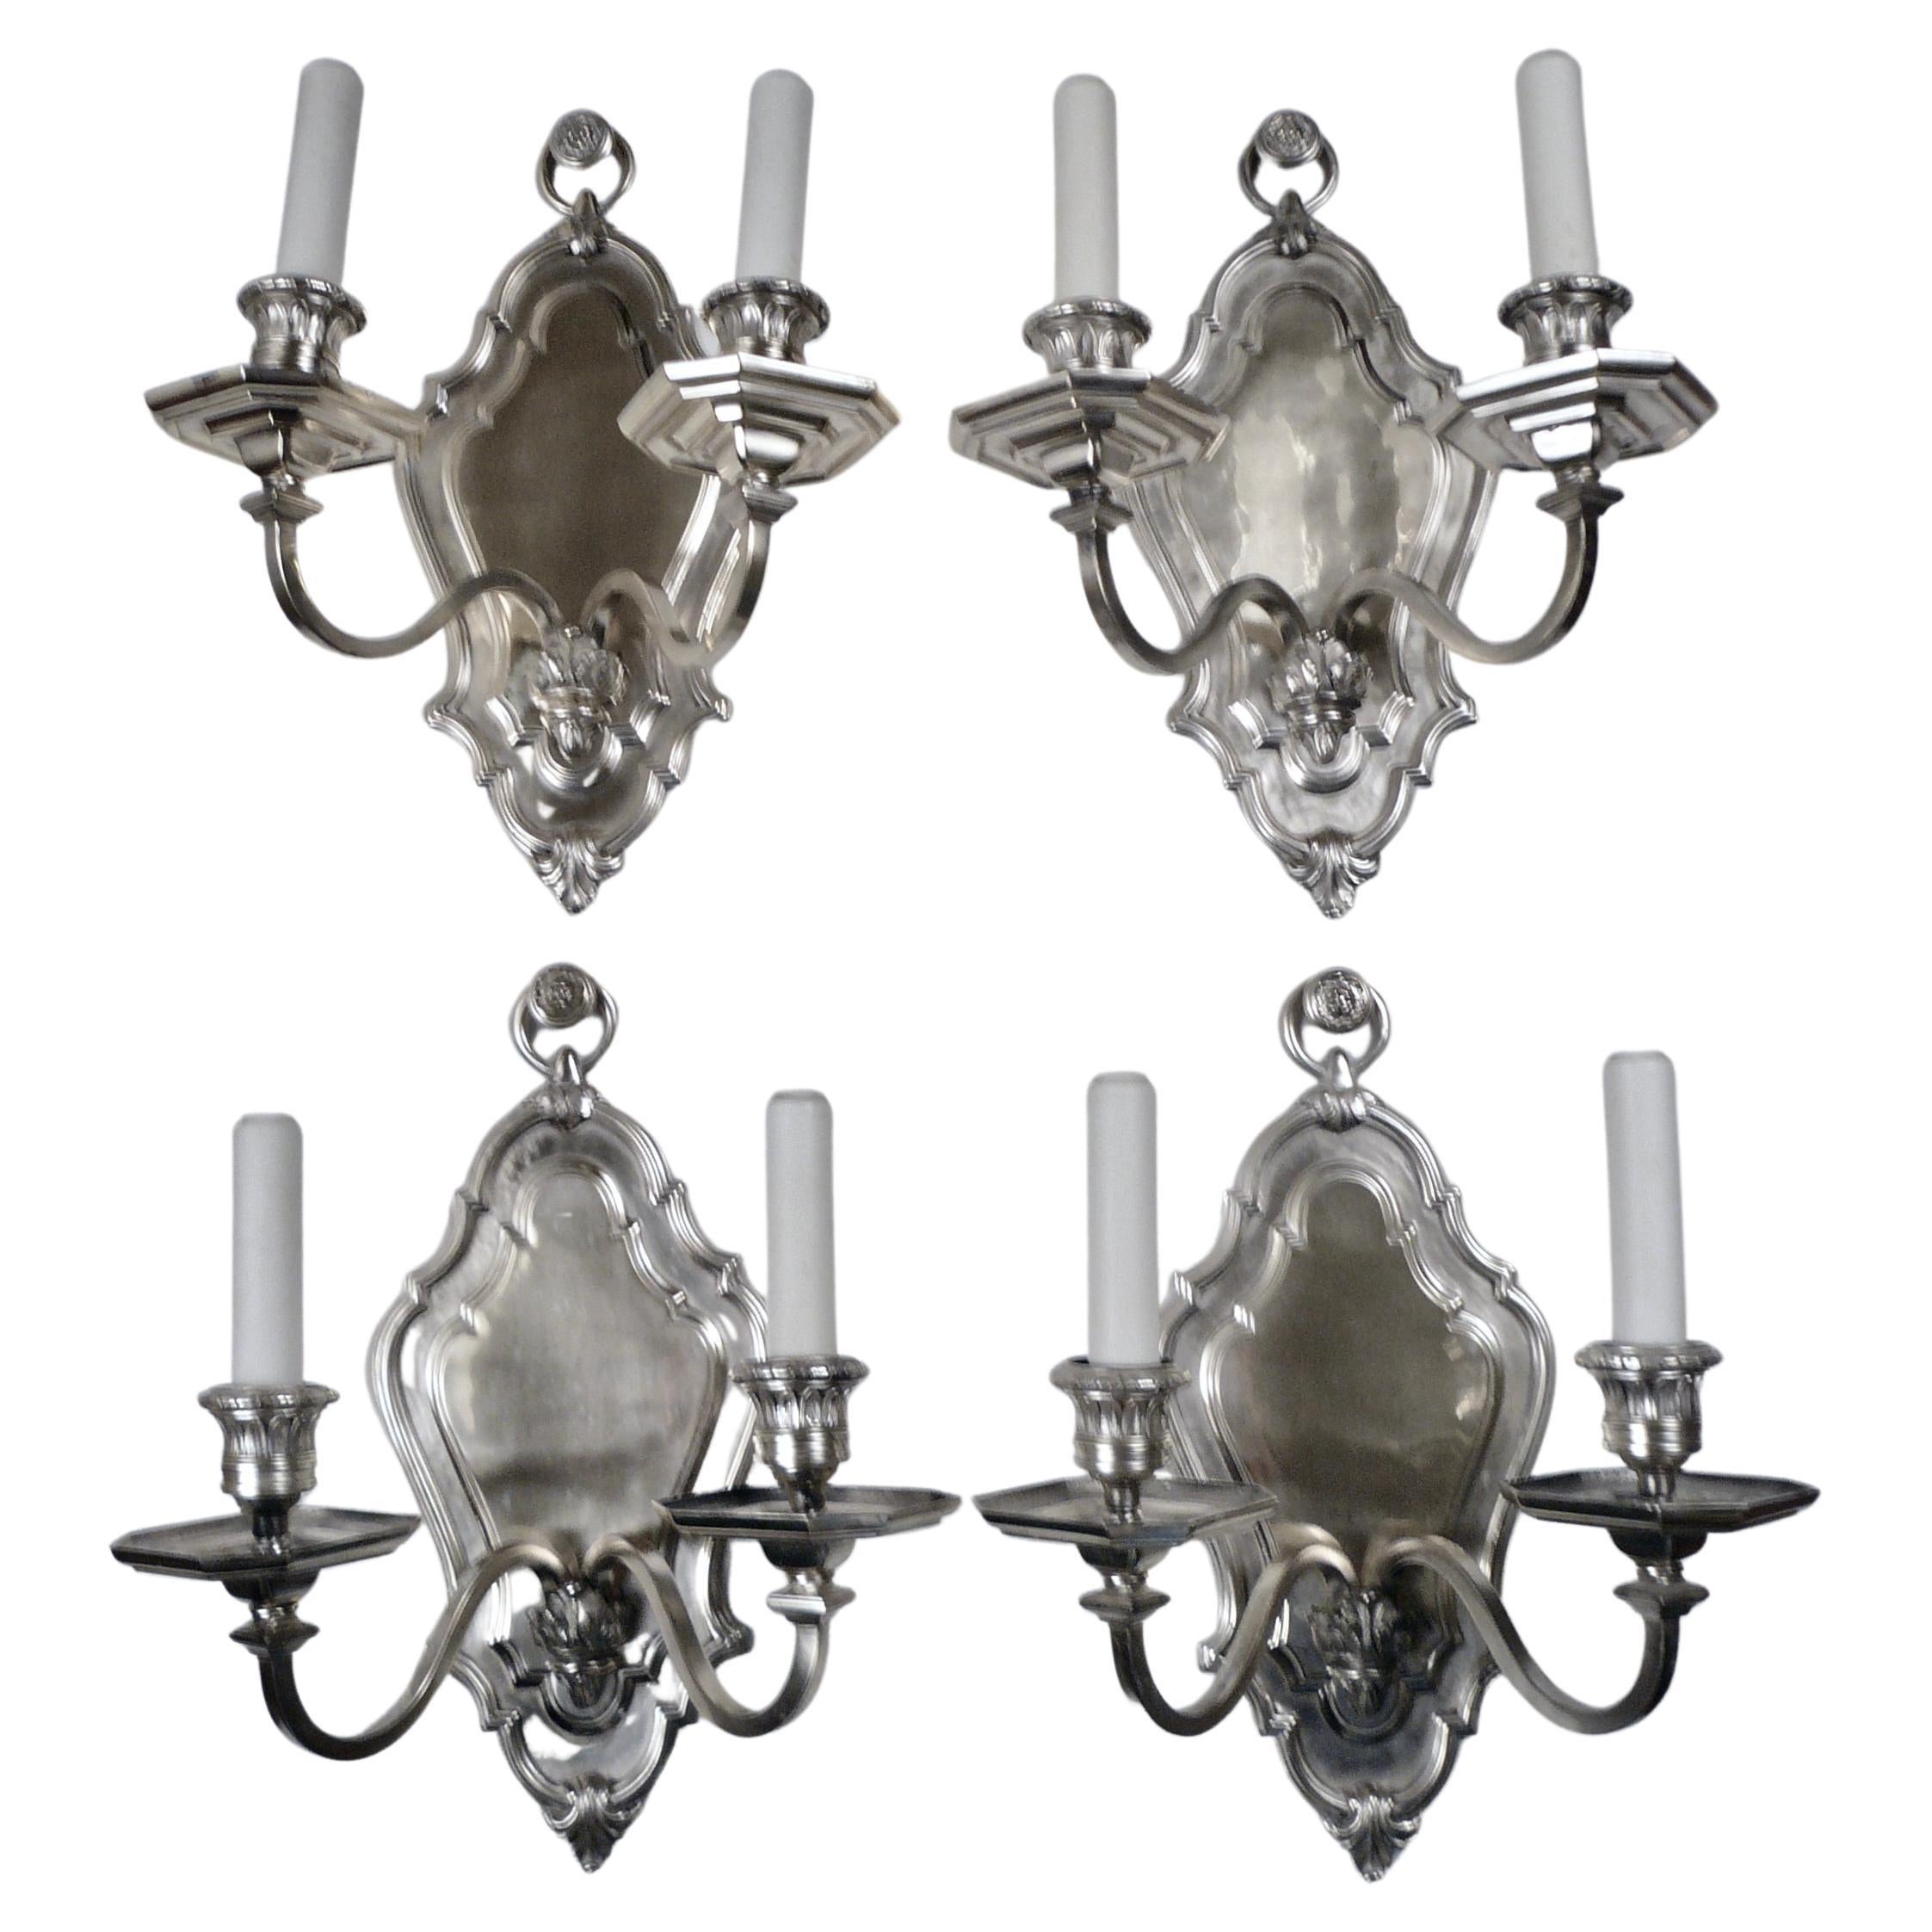 George II Wall Lights and Sconces